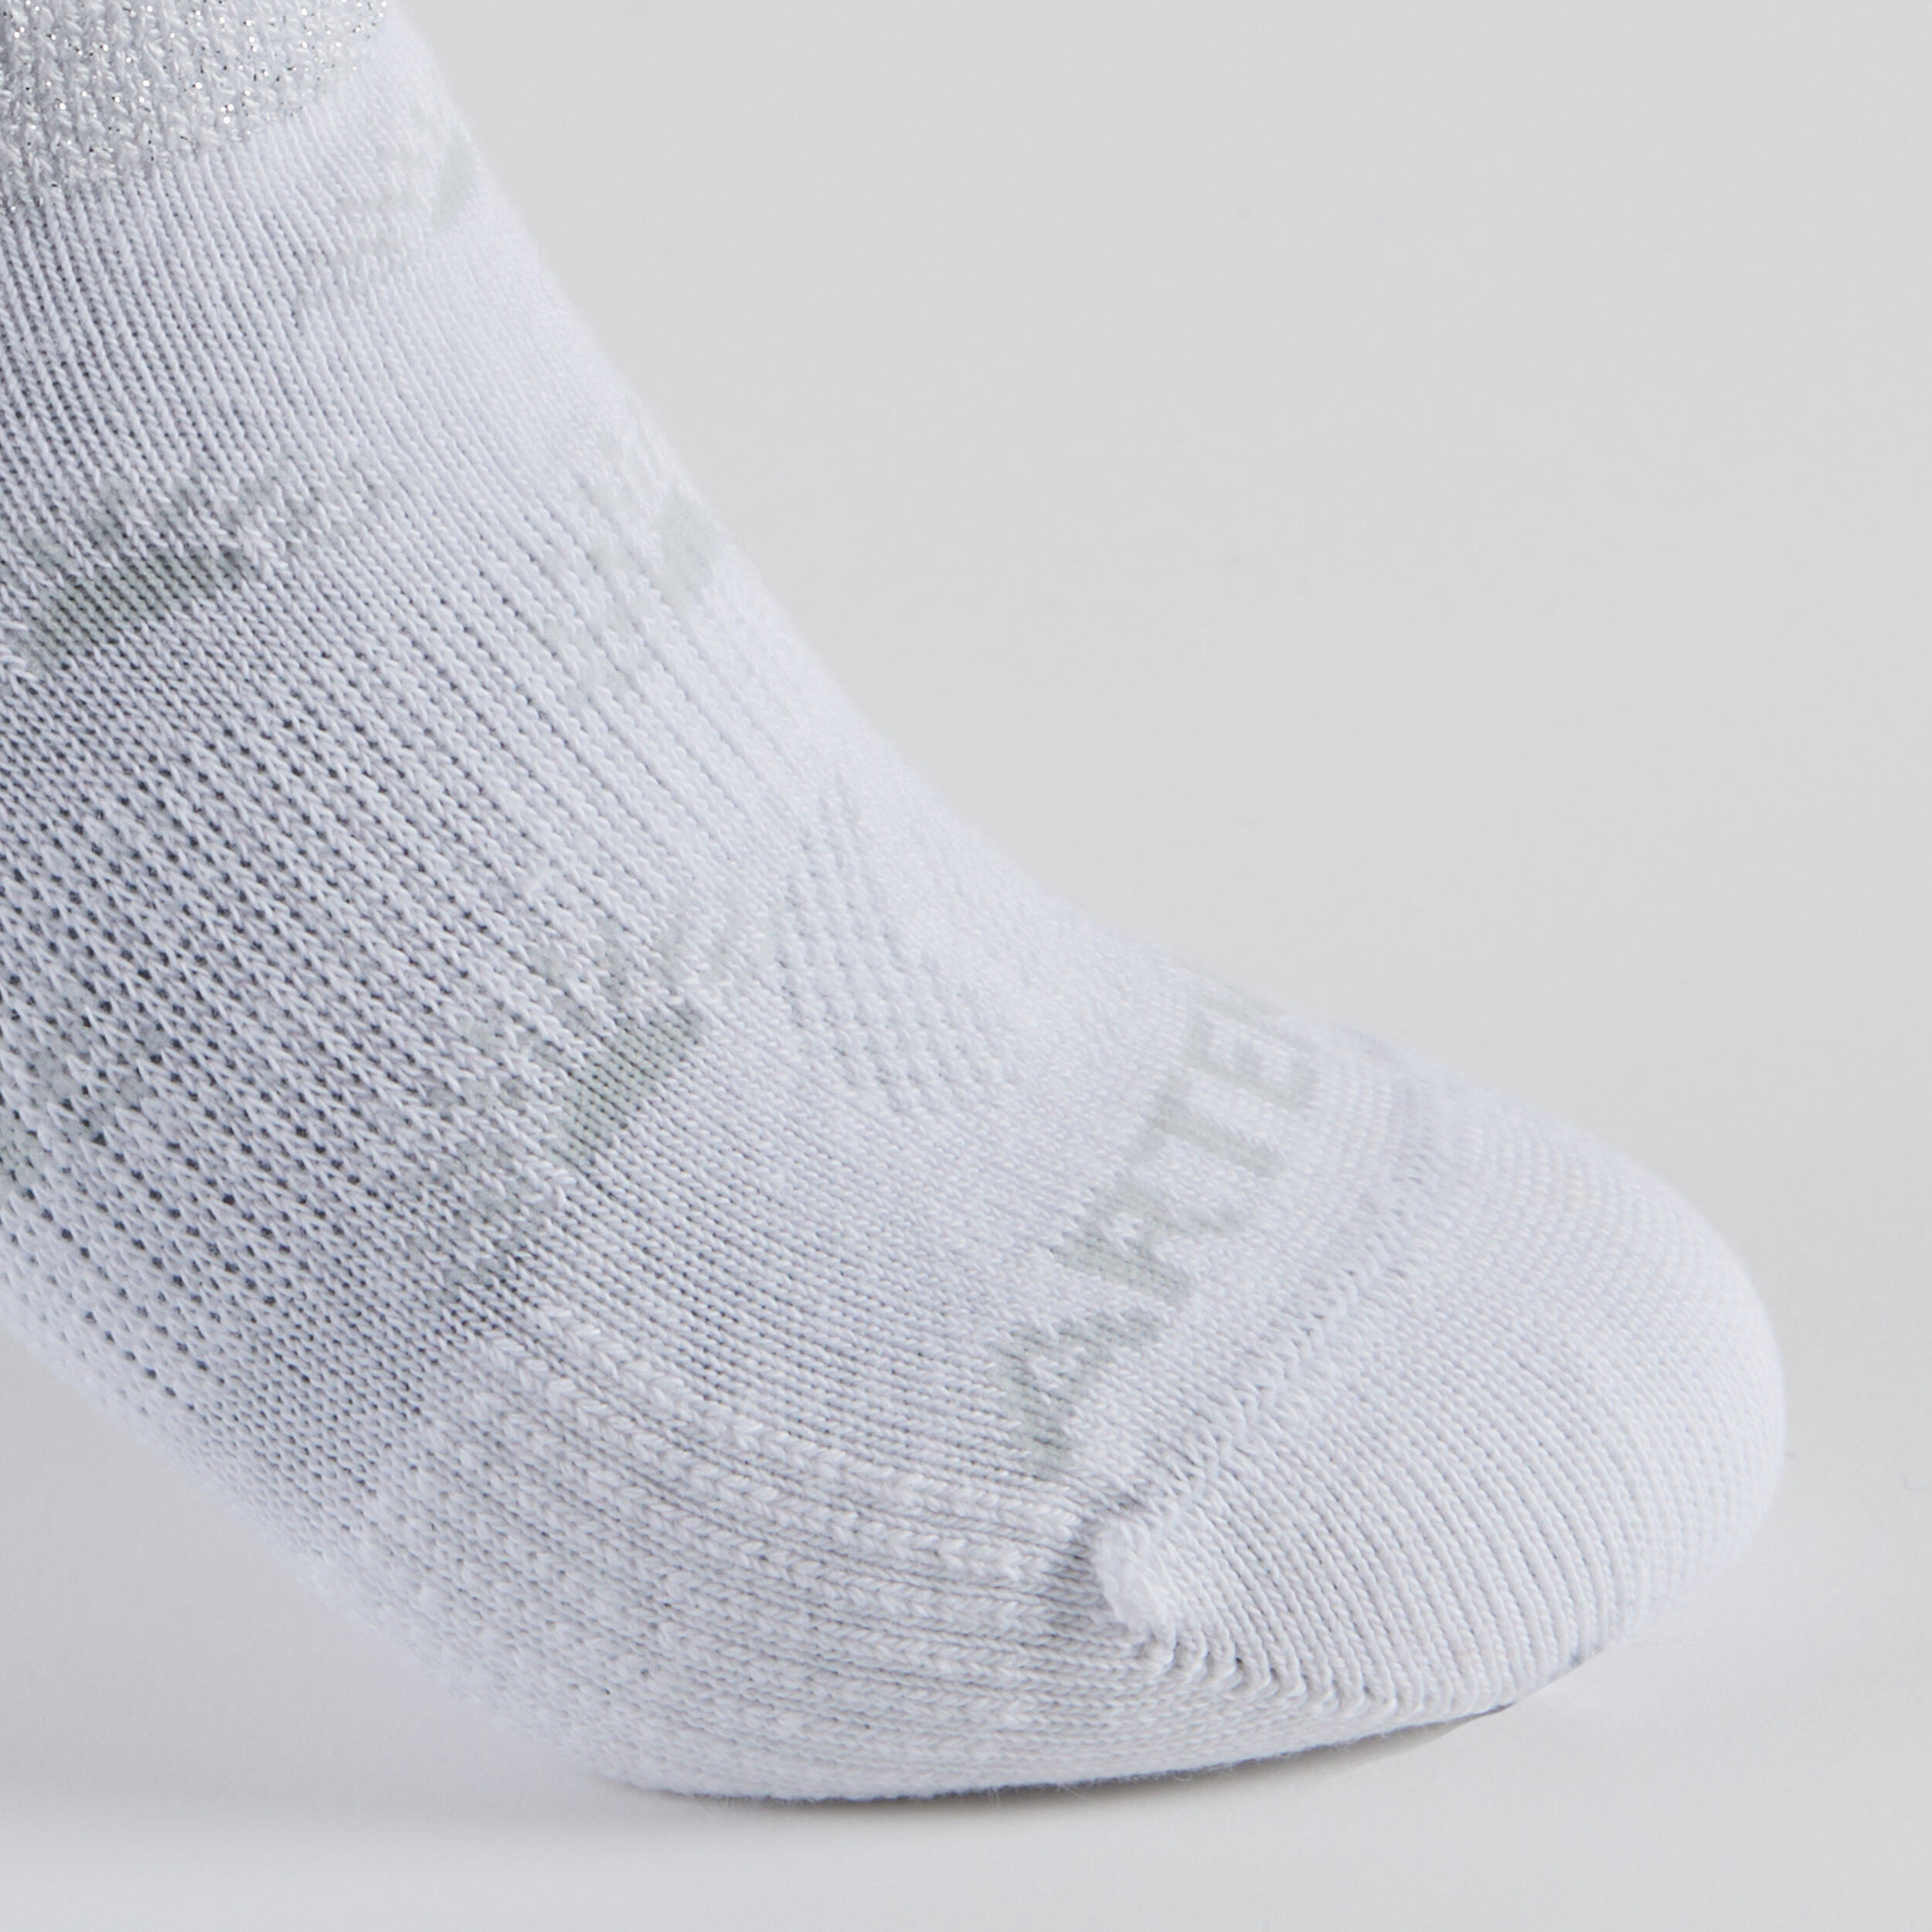 Kids' Low Tennis Socks Tri-Pack RS 160 - White with Patterns 7/14